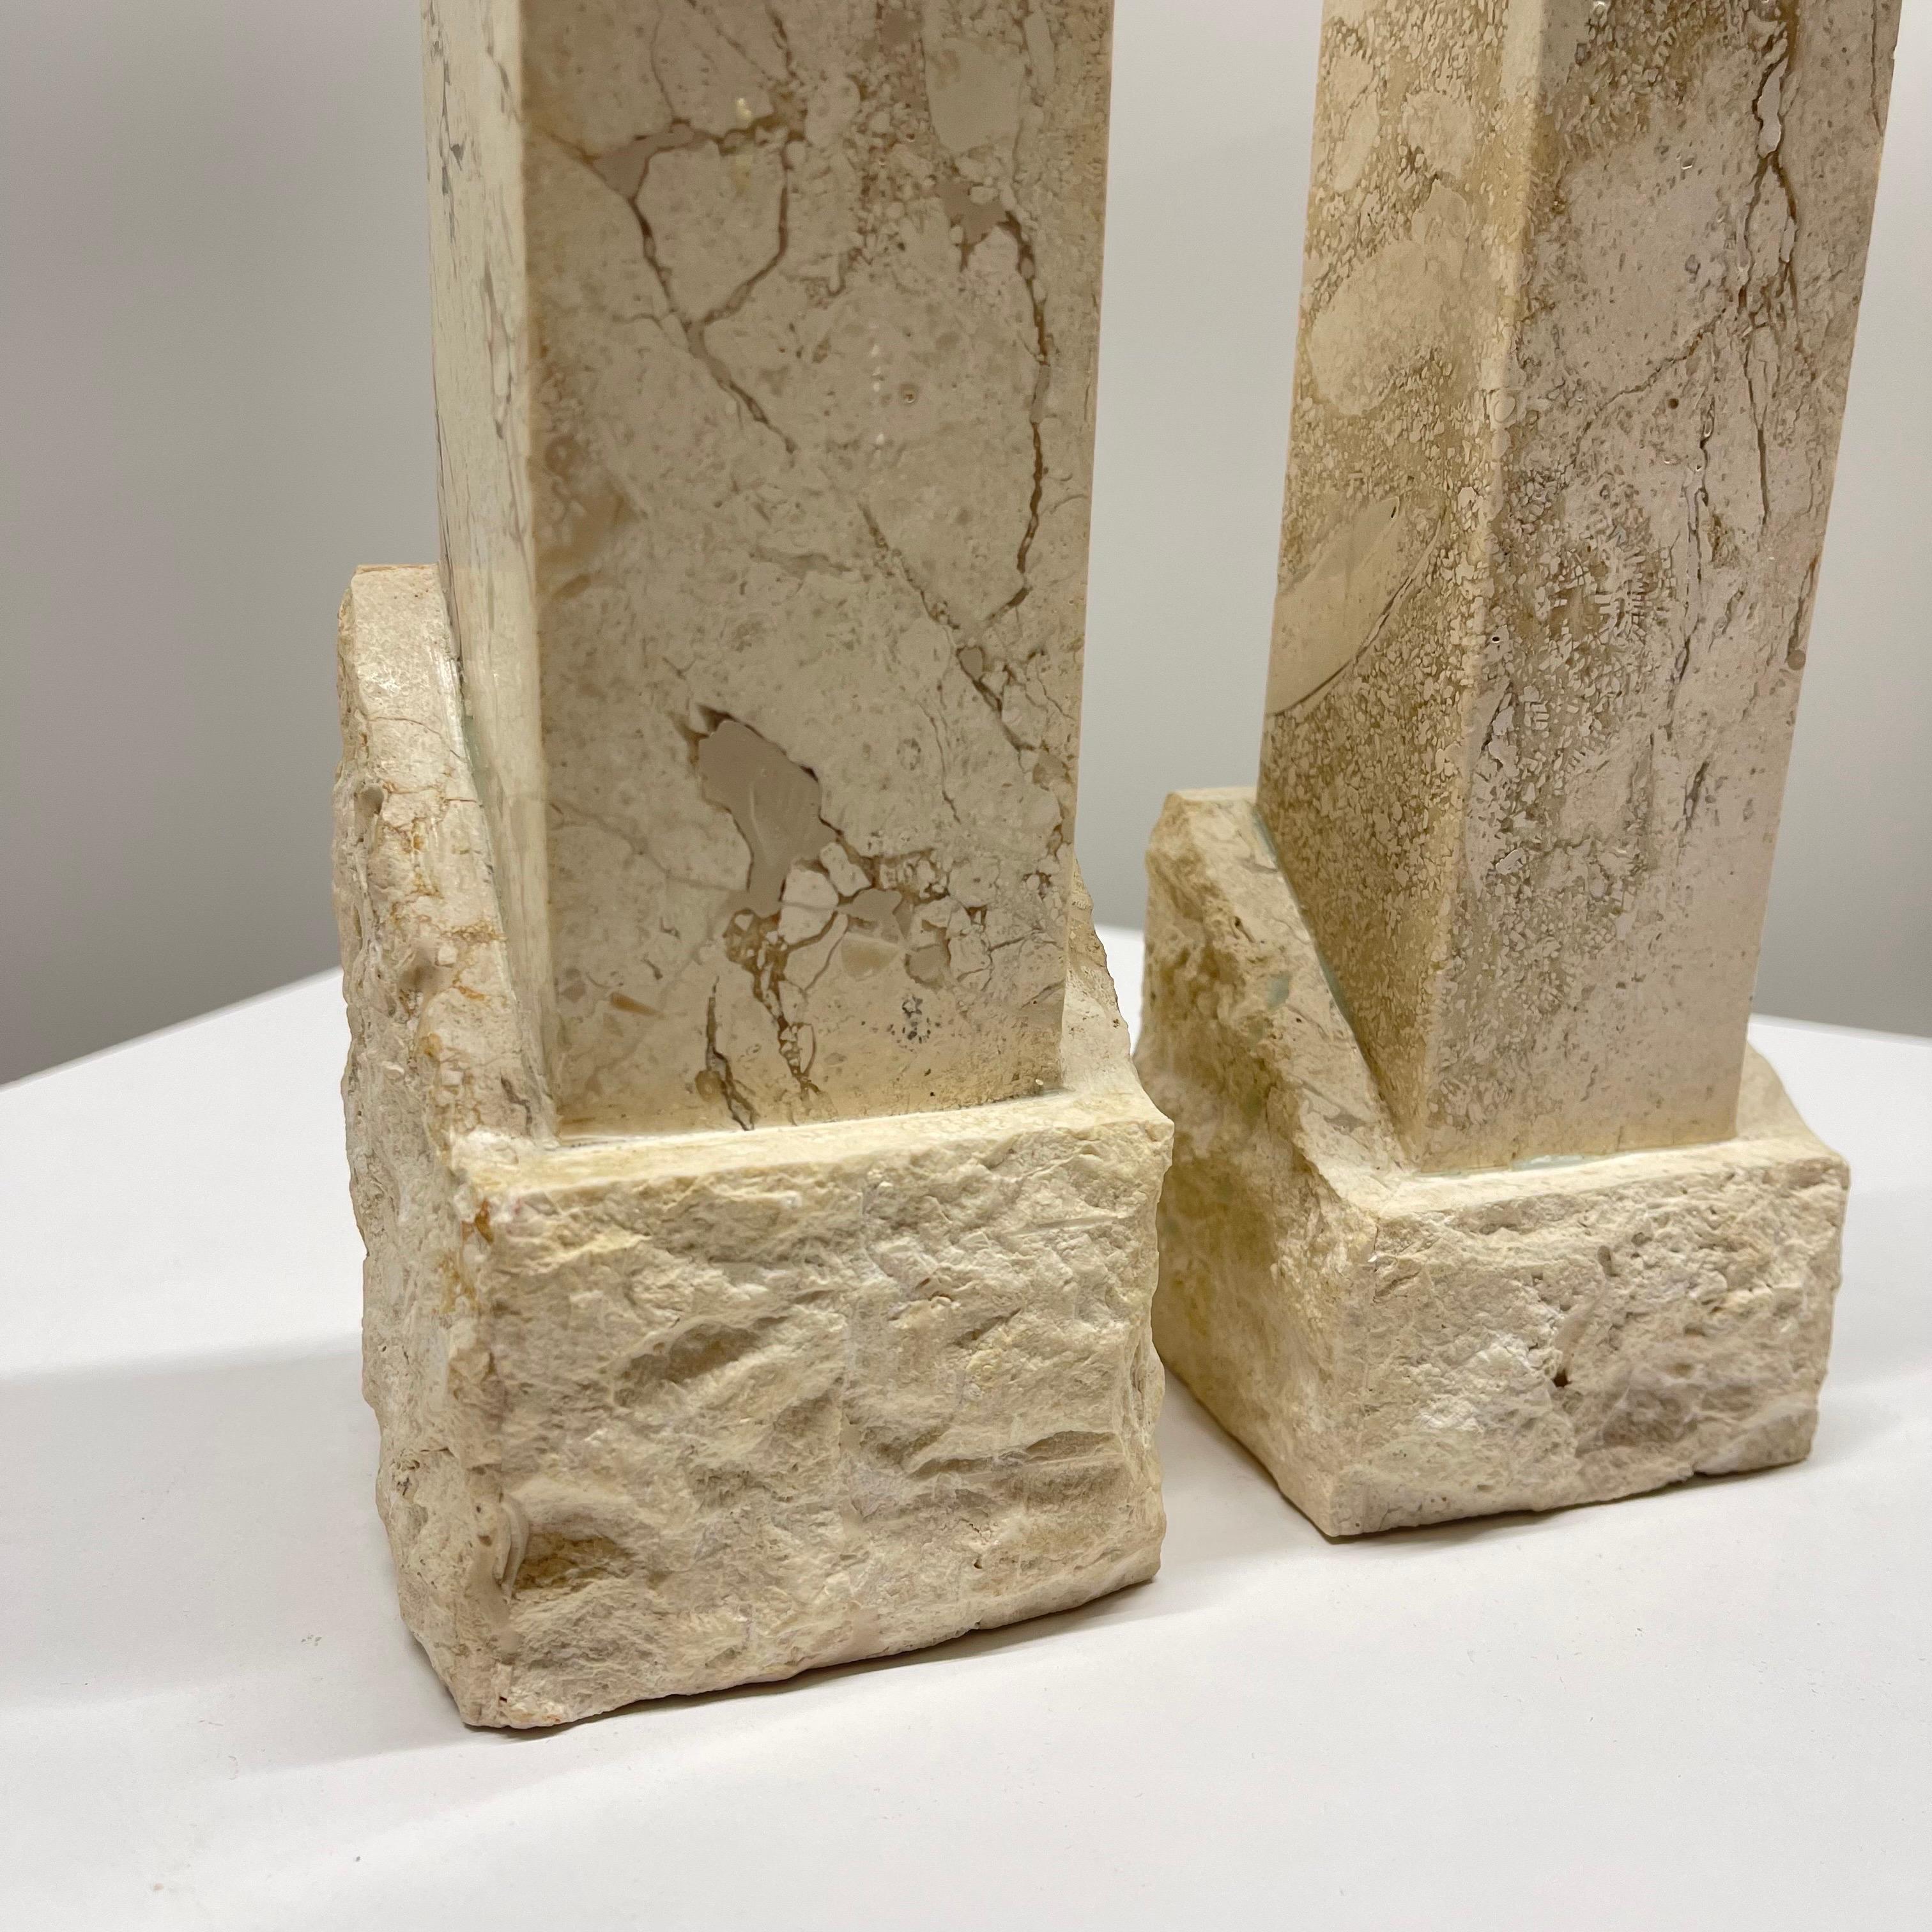 Pair of Post Modern Tessellated Travertine Candlesticks by Renoir Designs, 1990s For Sale 1